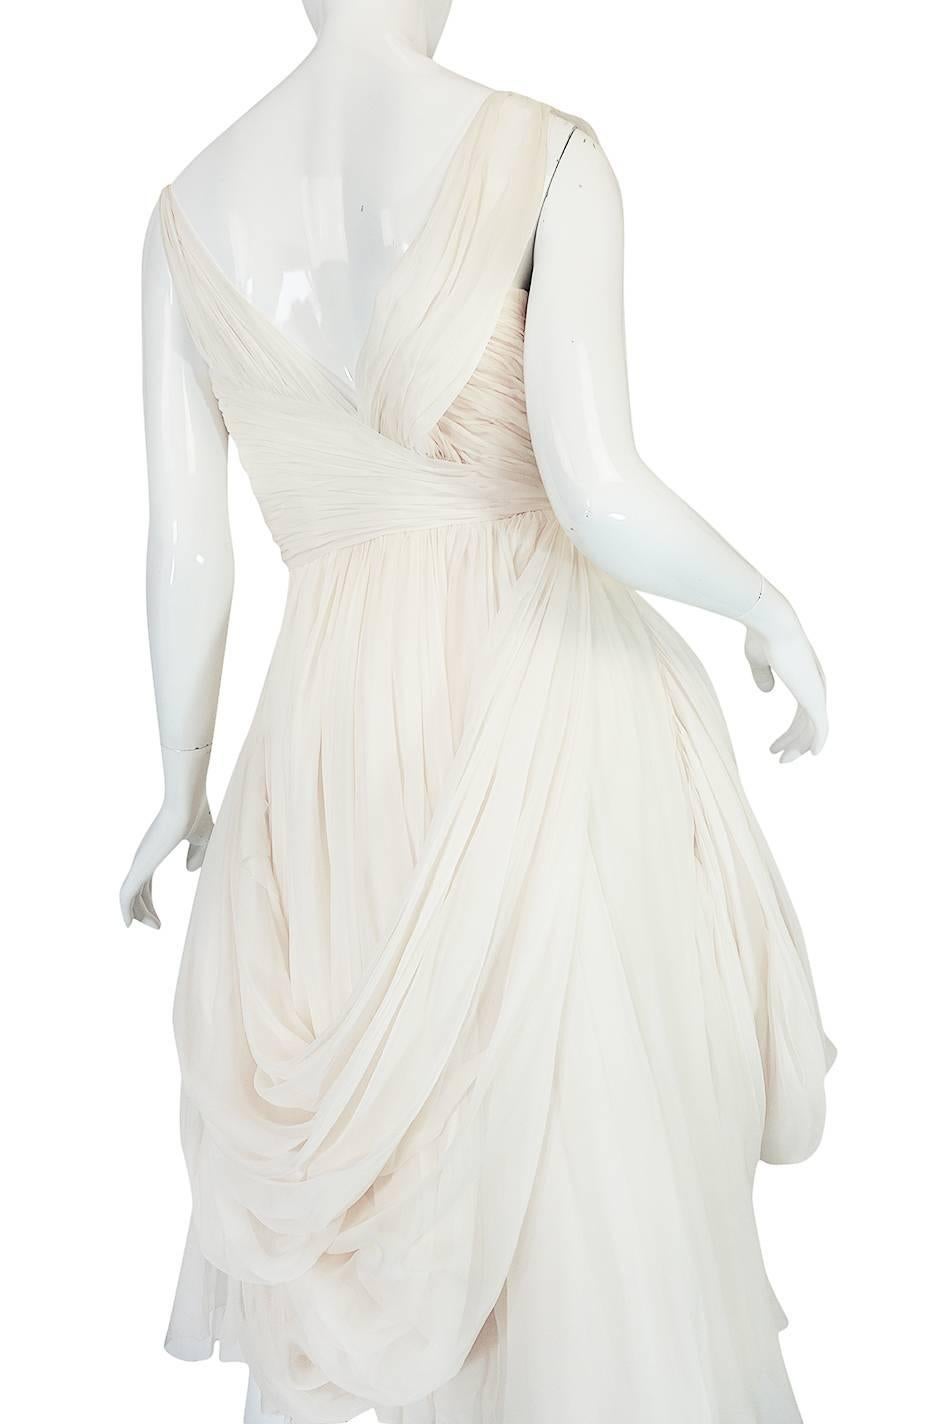 Women's 1950s Ivory Silk Pleated Dress in the Manner of Jean Desses